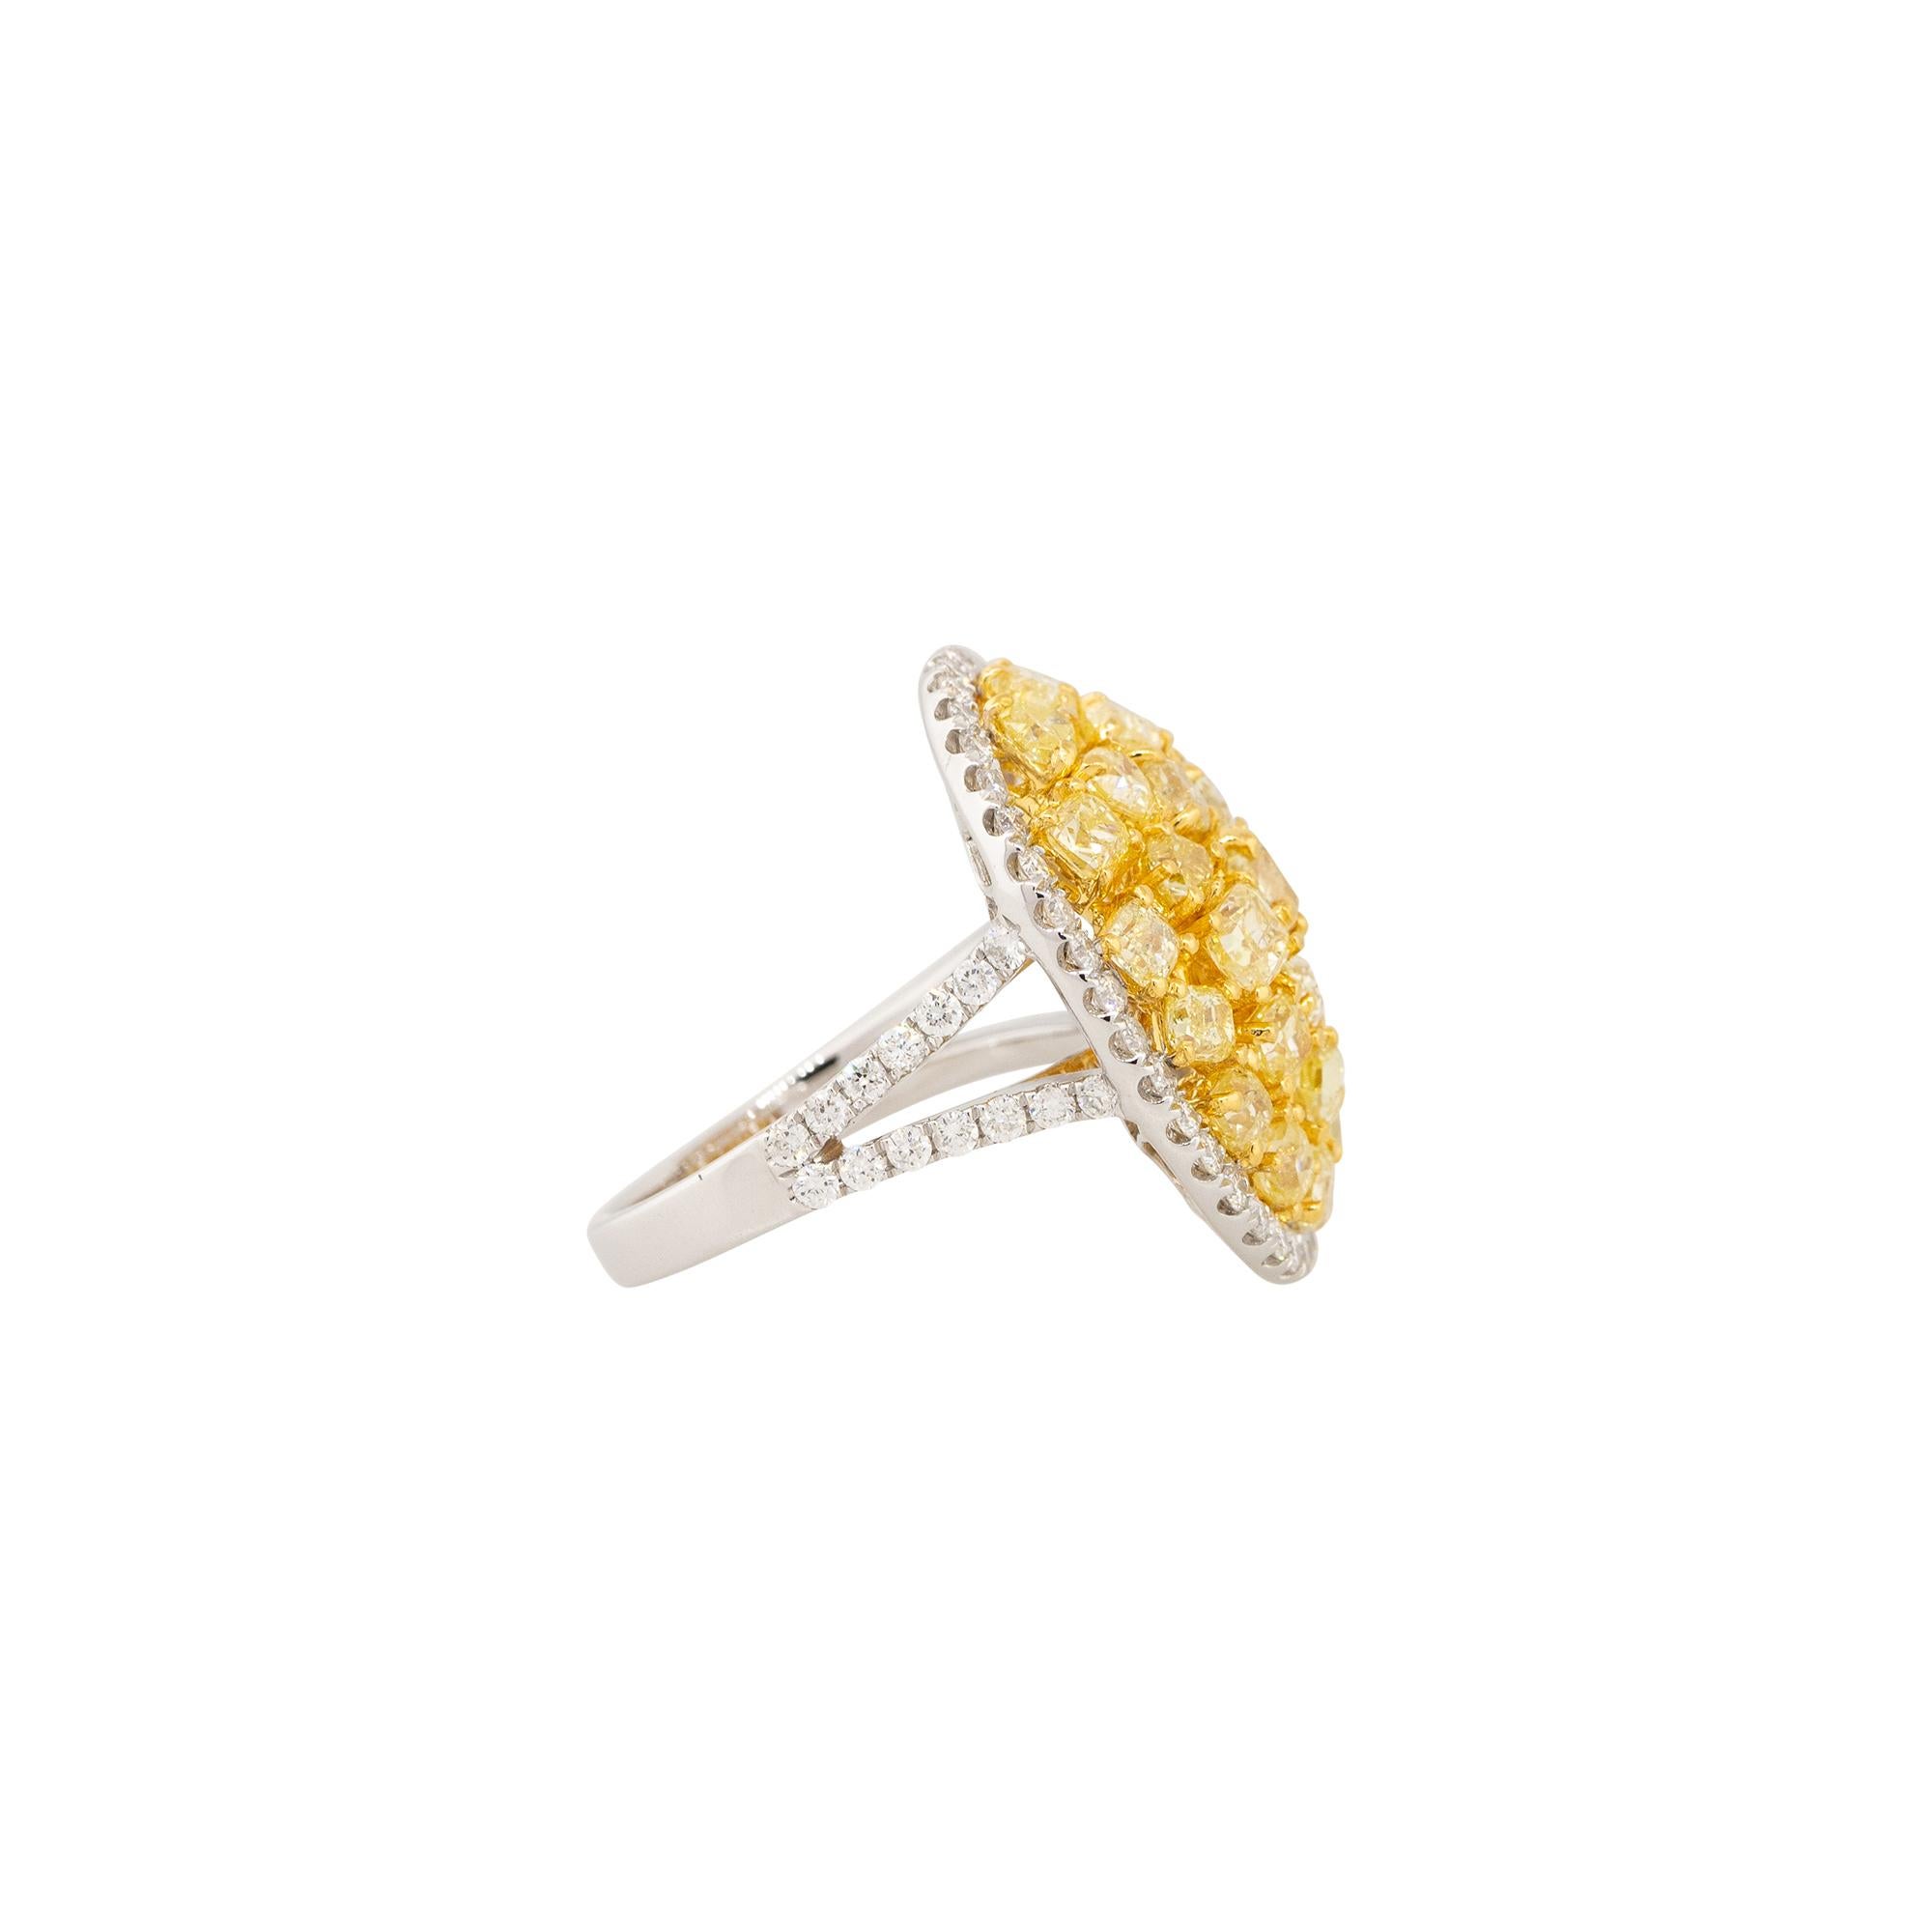 18k Two-Tone Gold 3.79ctw Yellow Diamond Oval Halo Ring
Style: Women's Oval Diamond Ring
Material: 18k White Gold
Main Diamond Details: Approximately 3.79ctw of Multi-Shape Diamonds (26 stones) and approximately 0.92ctw of Diamonds in the halo and